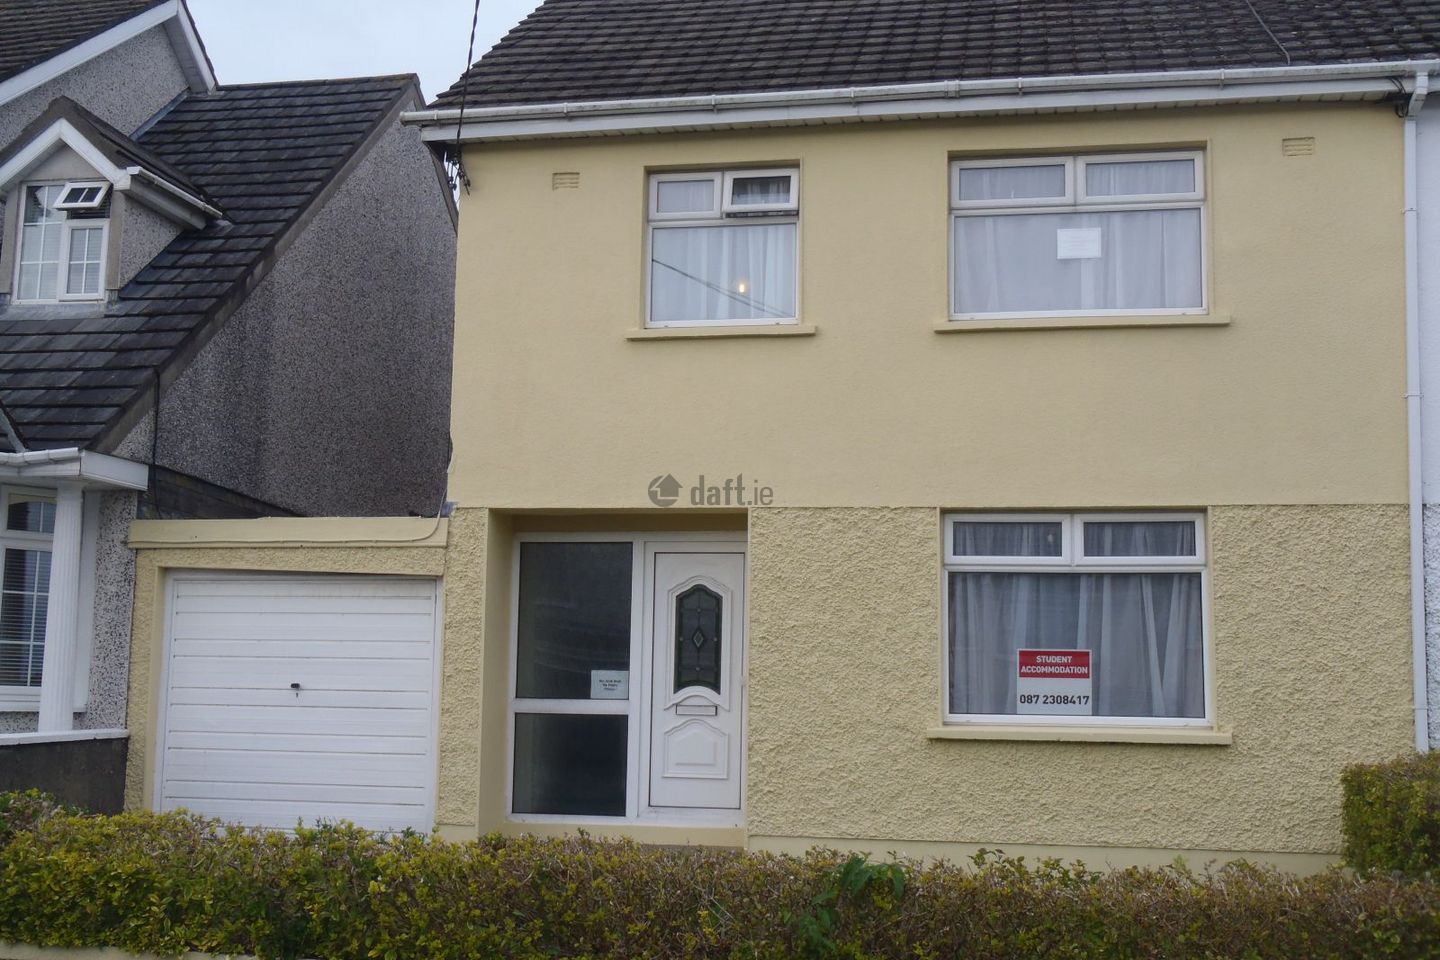 33 Lismore Park, Waterford, Butlerstown, Co. Waterford